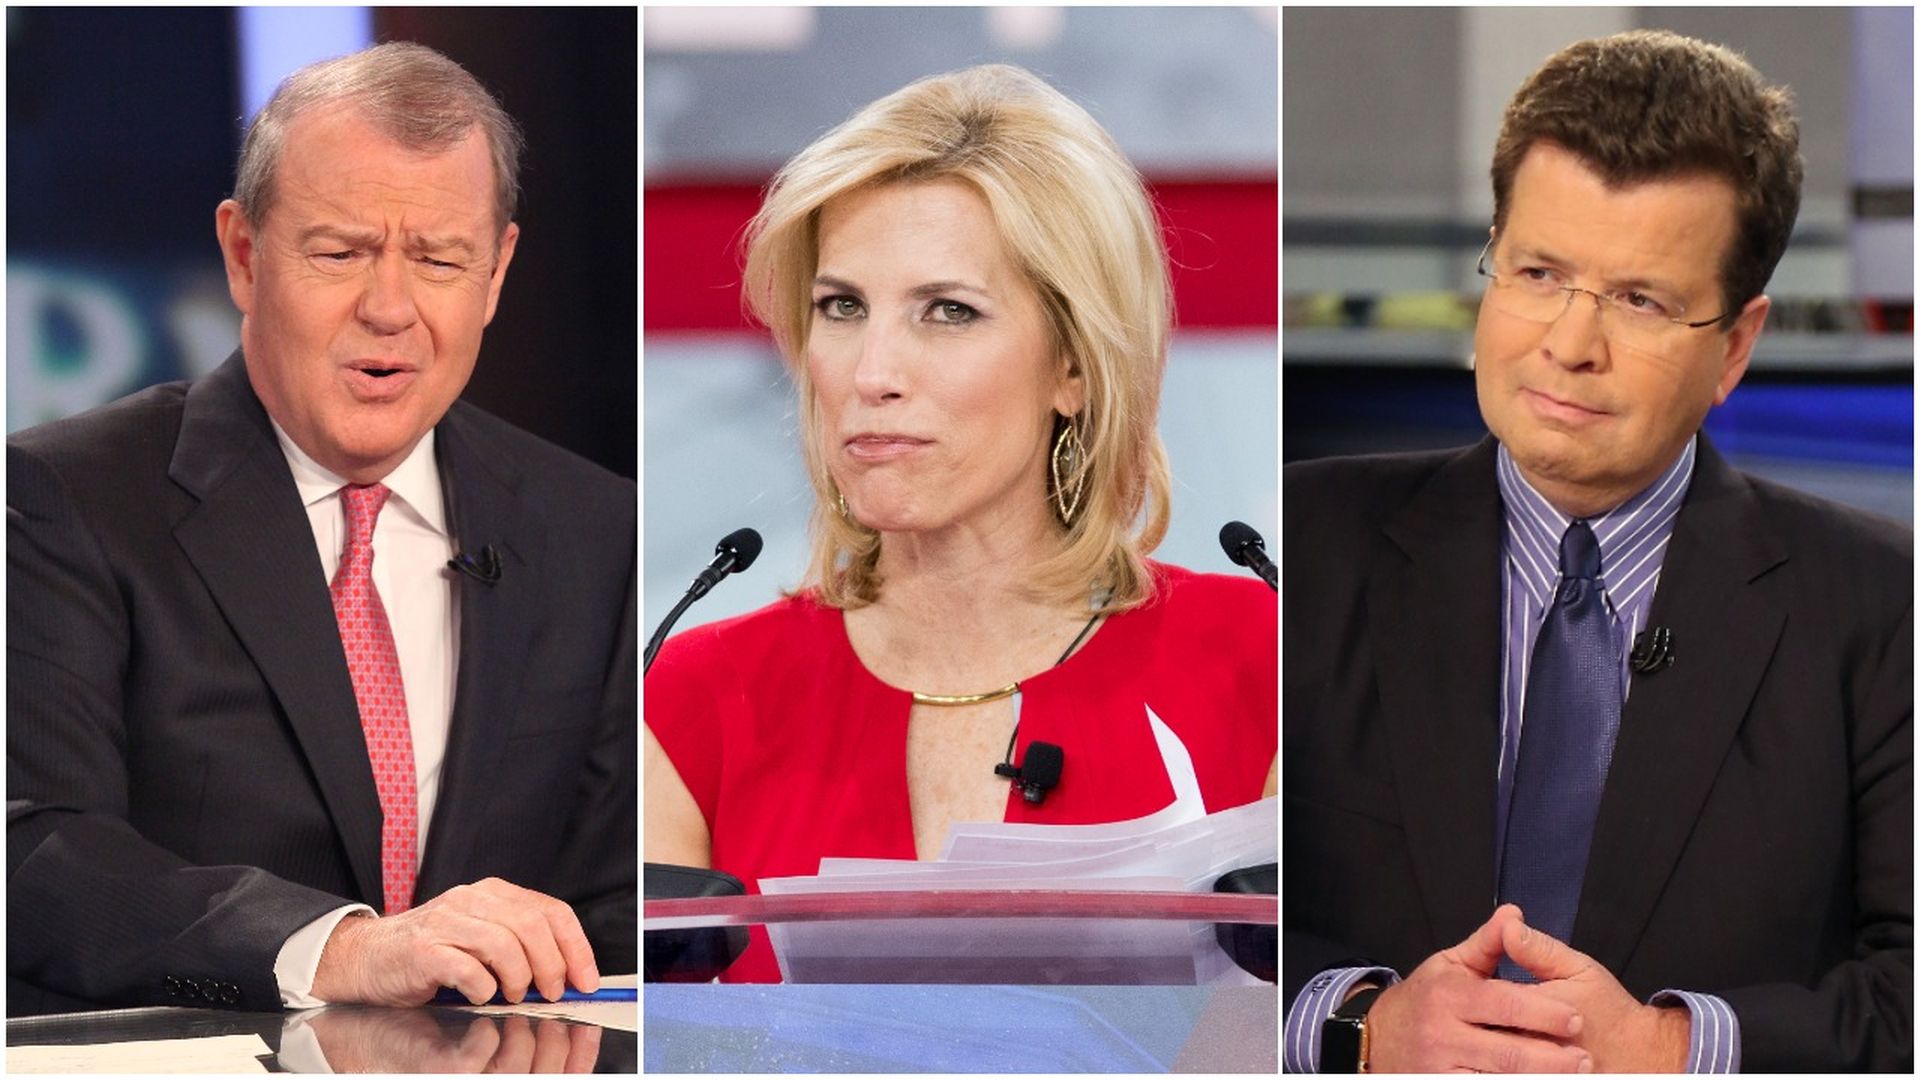 Stuart Varney, Laura Ingraham and Neil Cavuto all wear quizzical faces